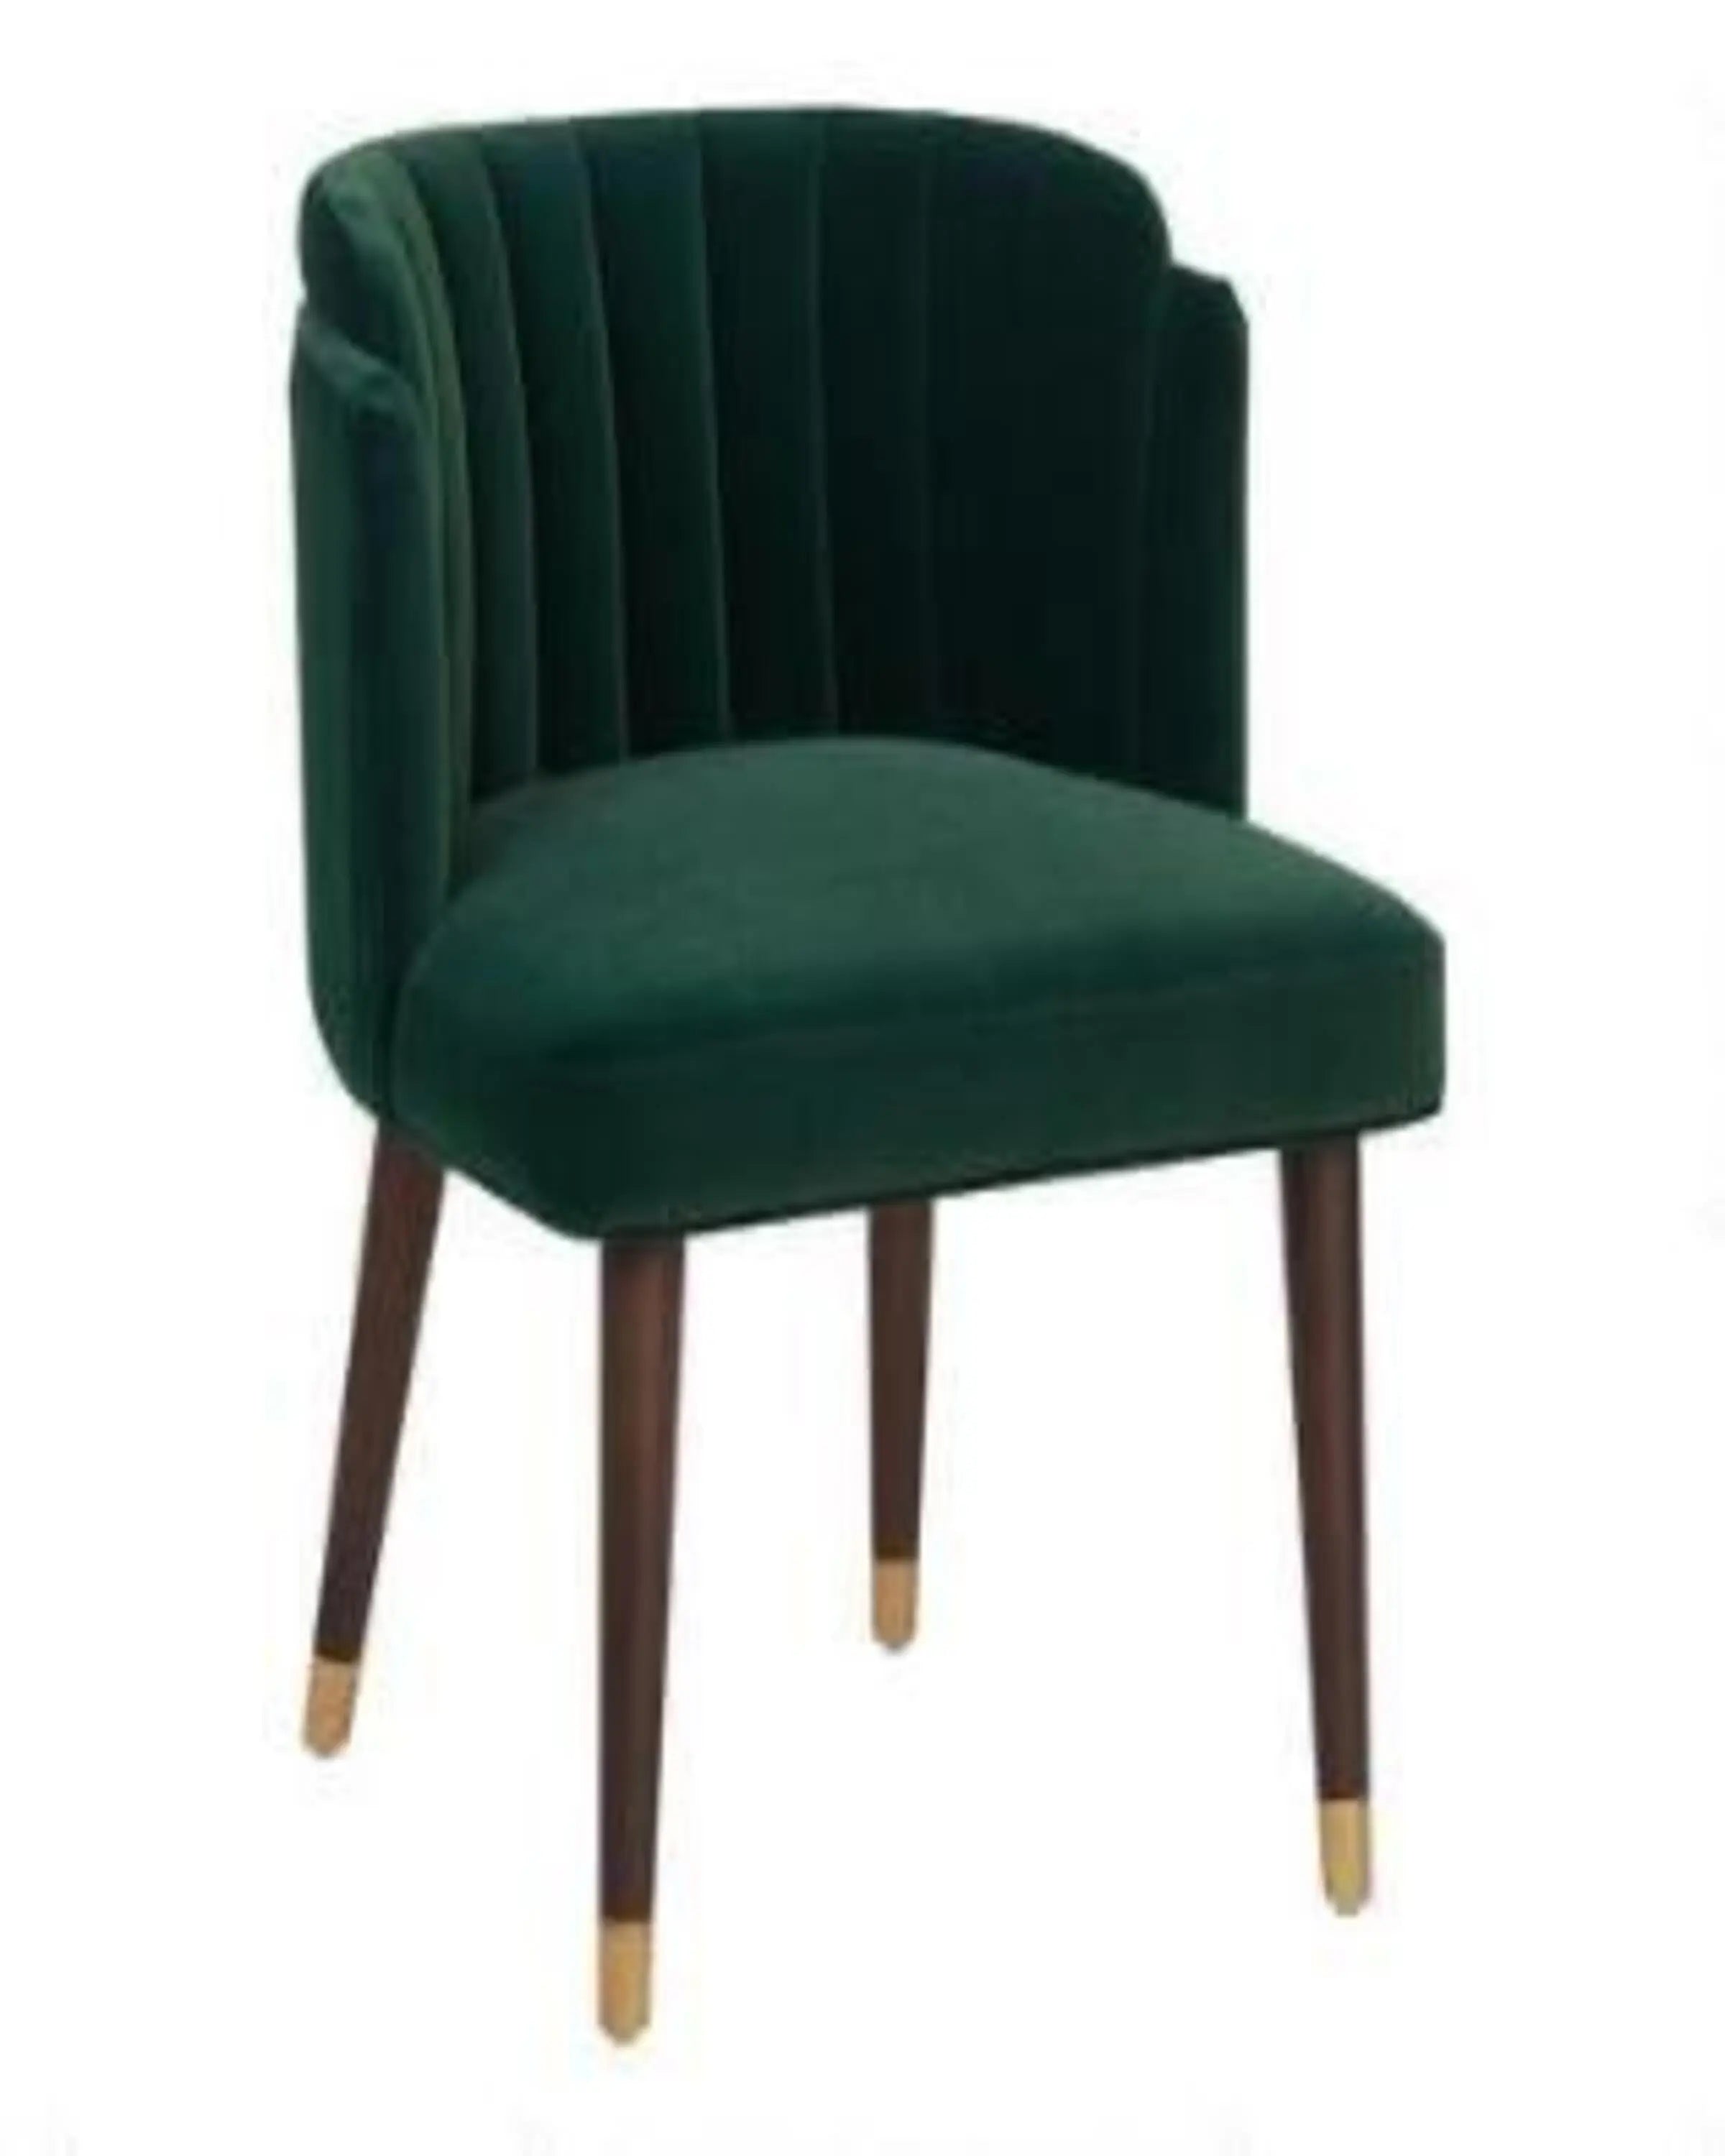 Shia Green Dining Chairs ANGIE HOMES